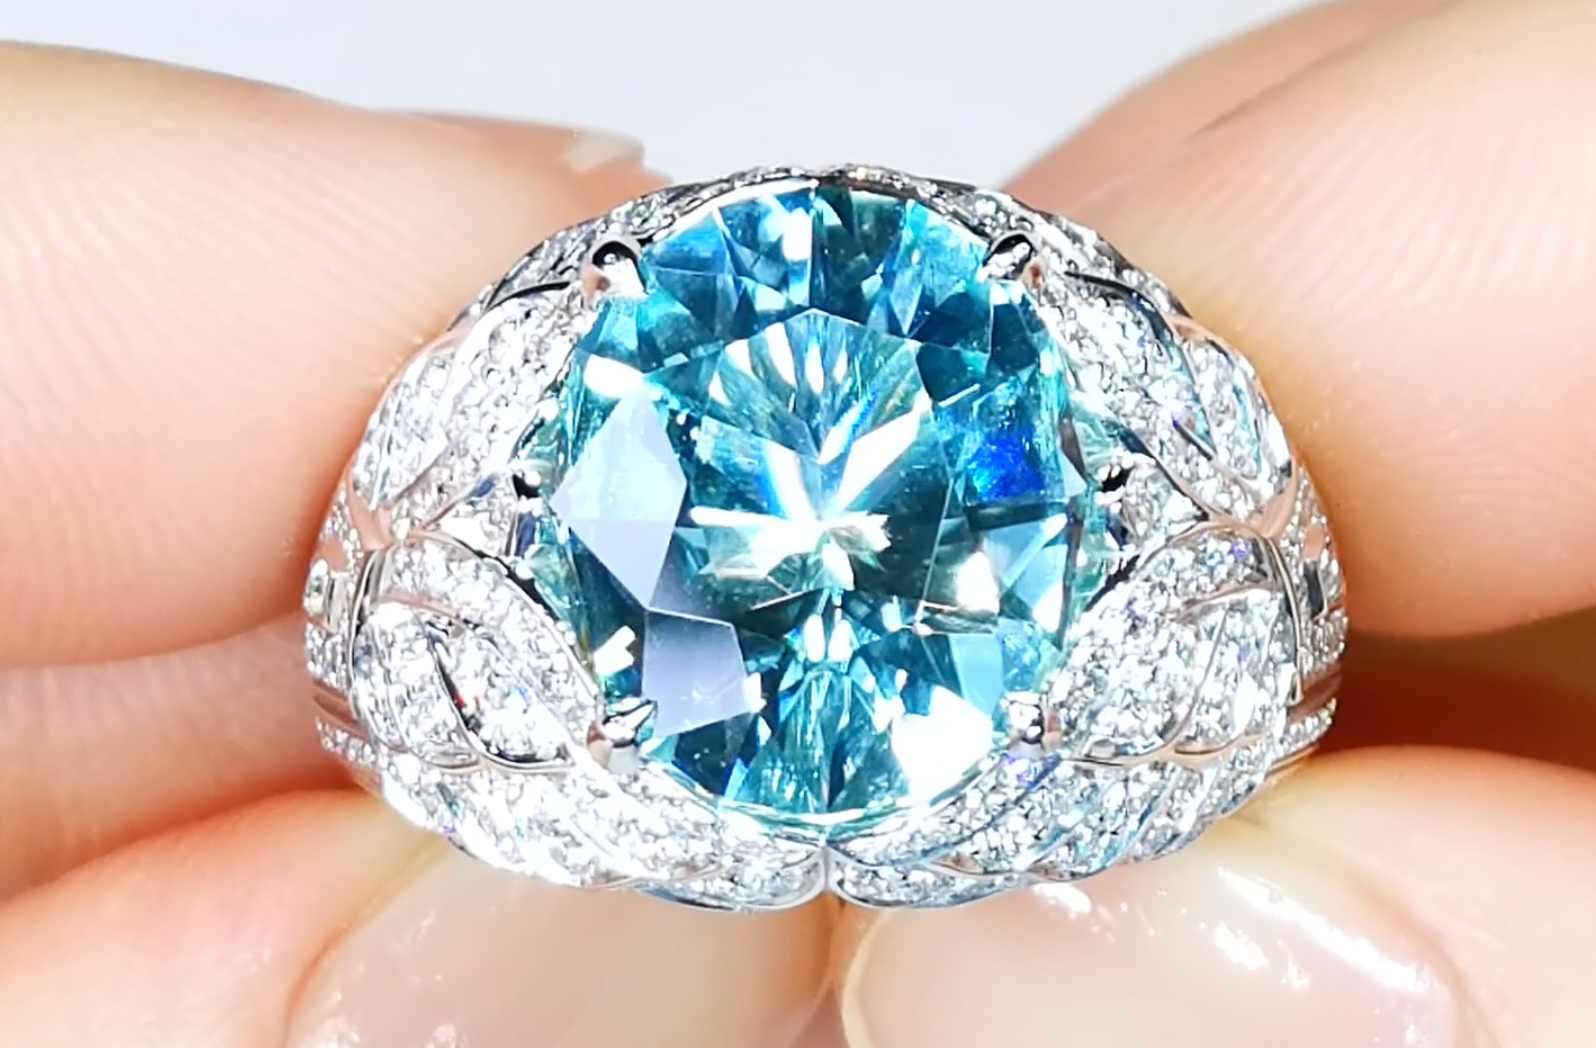 5.61ct Unheated Flawless Paraiba Tourmaline Ring with D Flawless Diamonds set in 18K White Gold